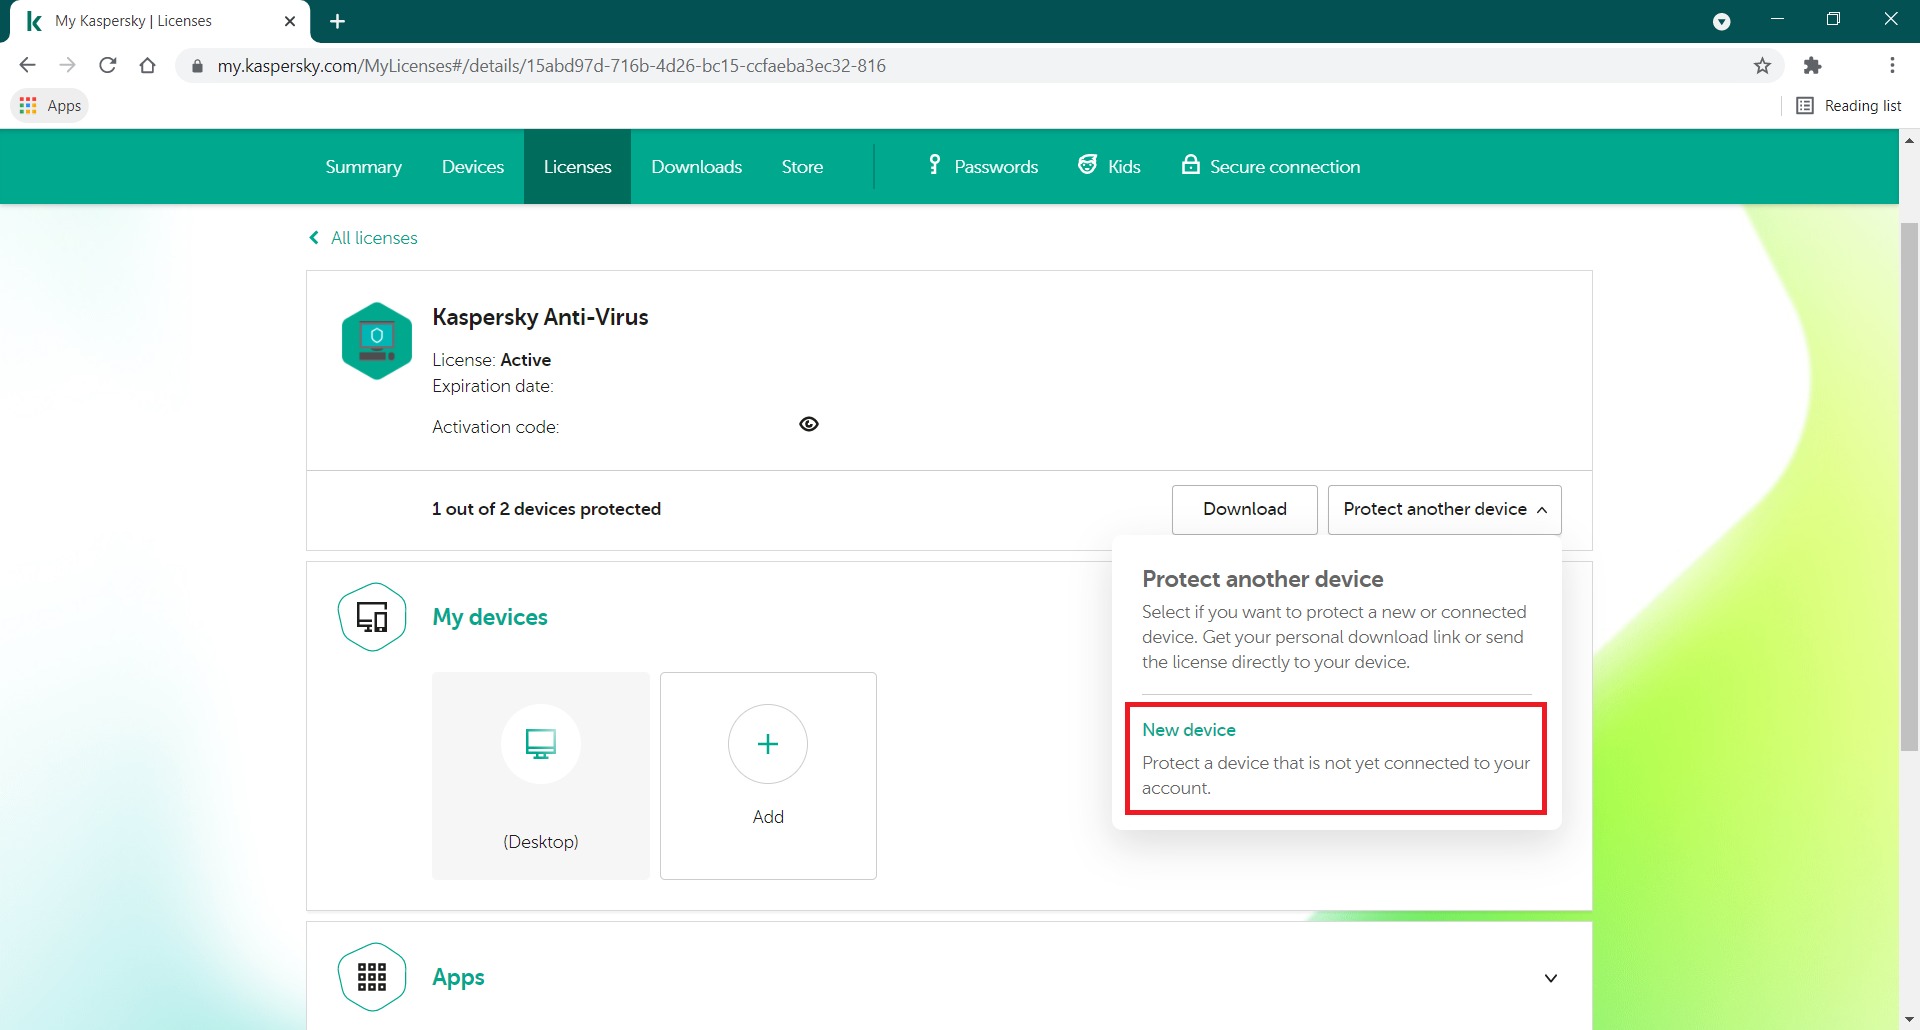 How To Add A Device To Kaspersky